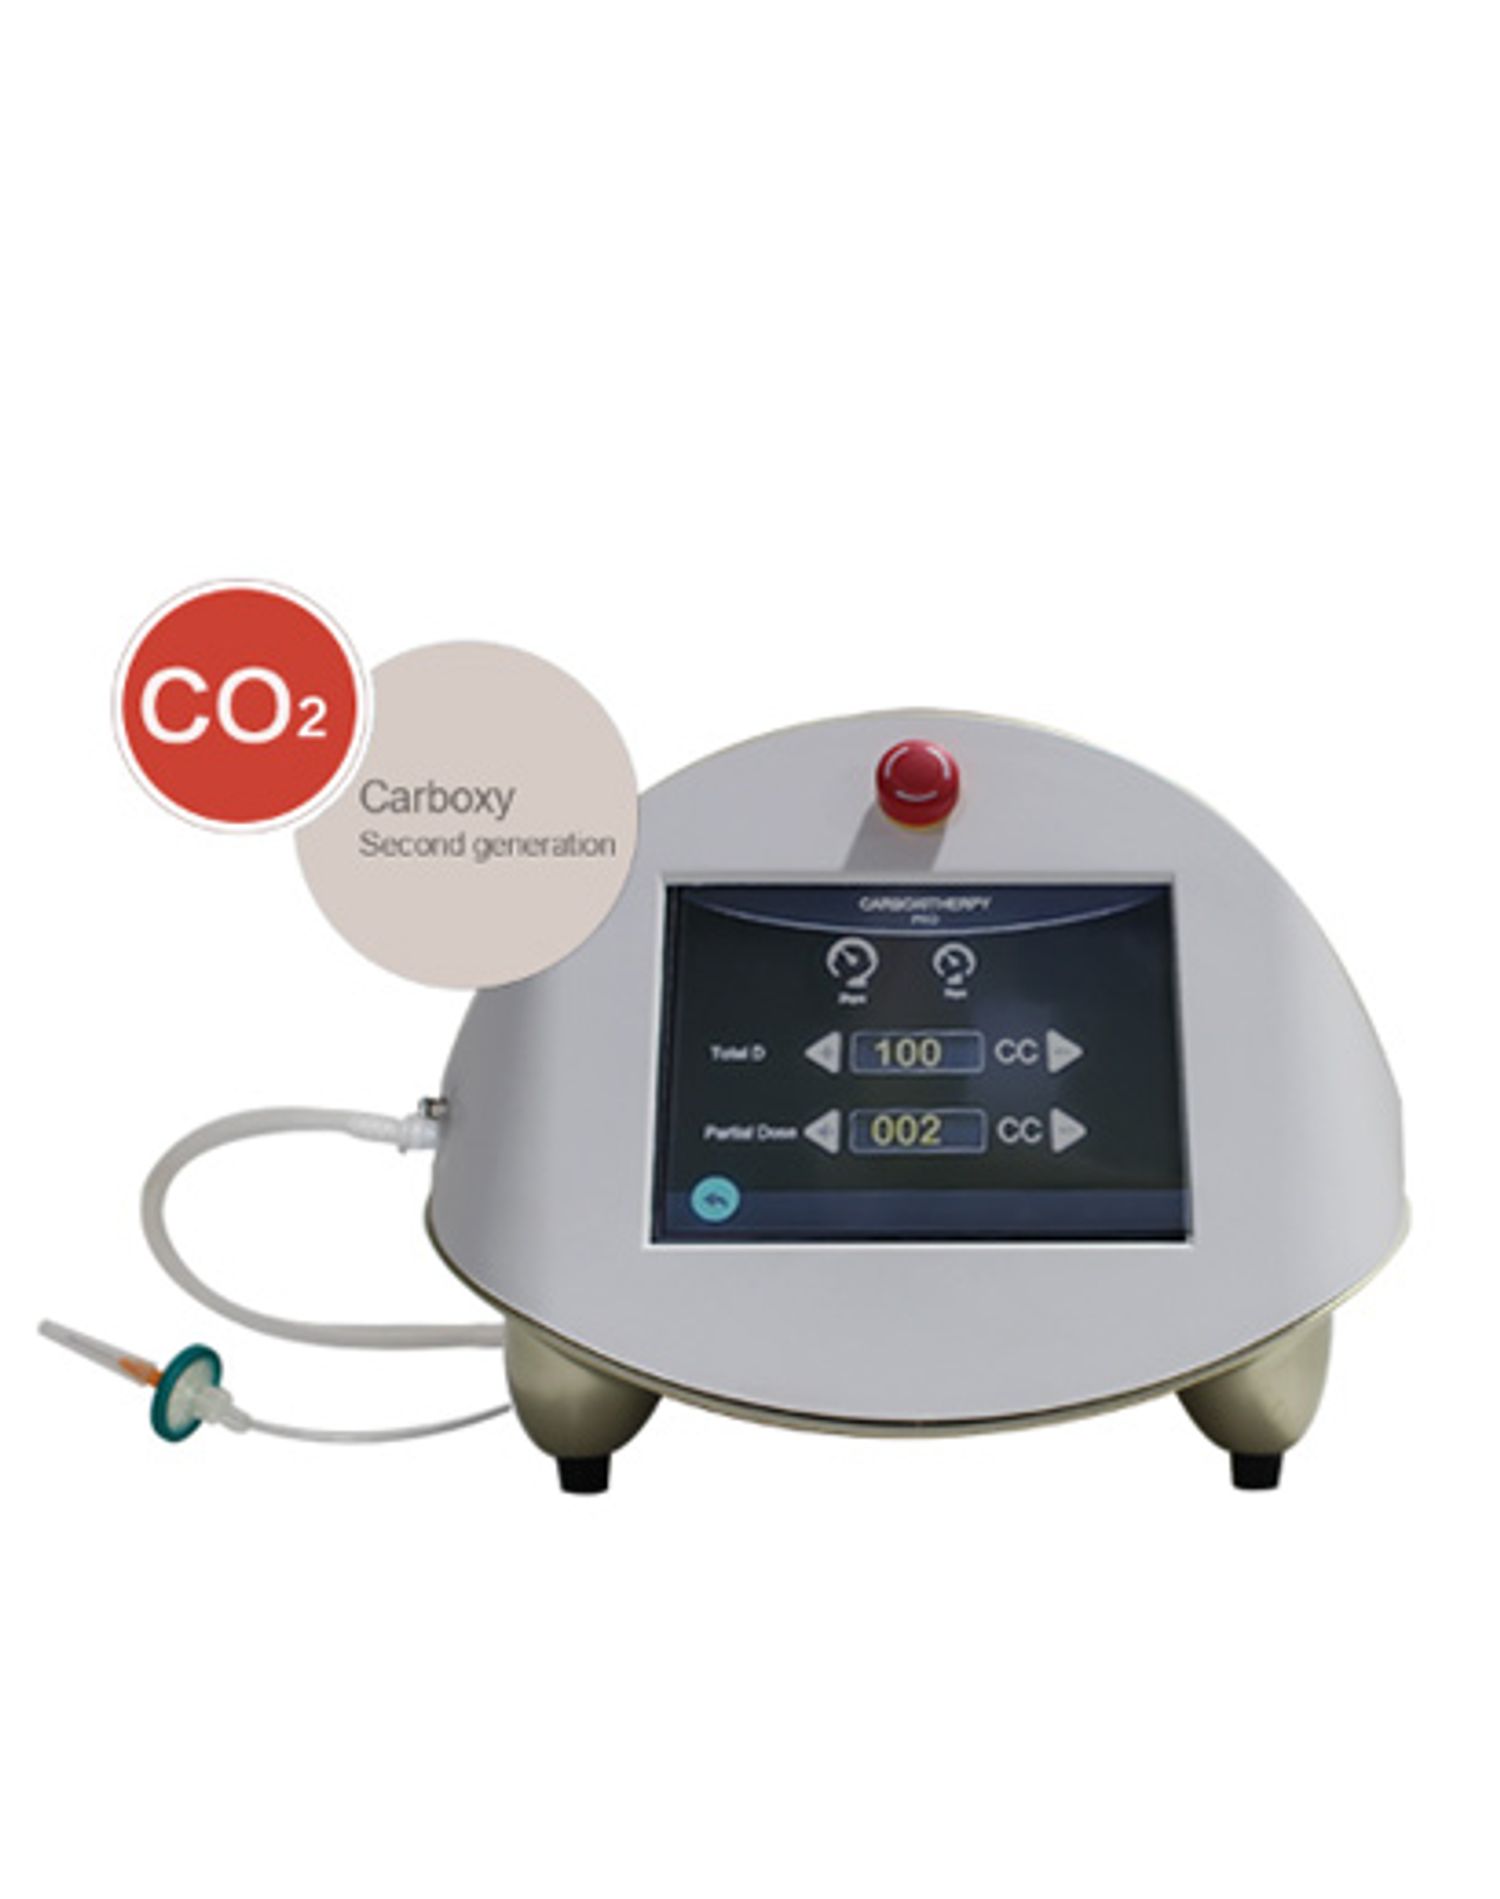 Jontelaser carbontherapy machine front view